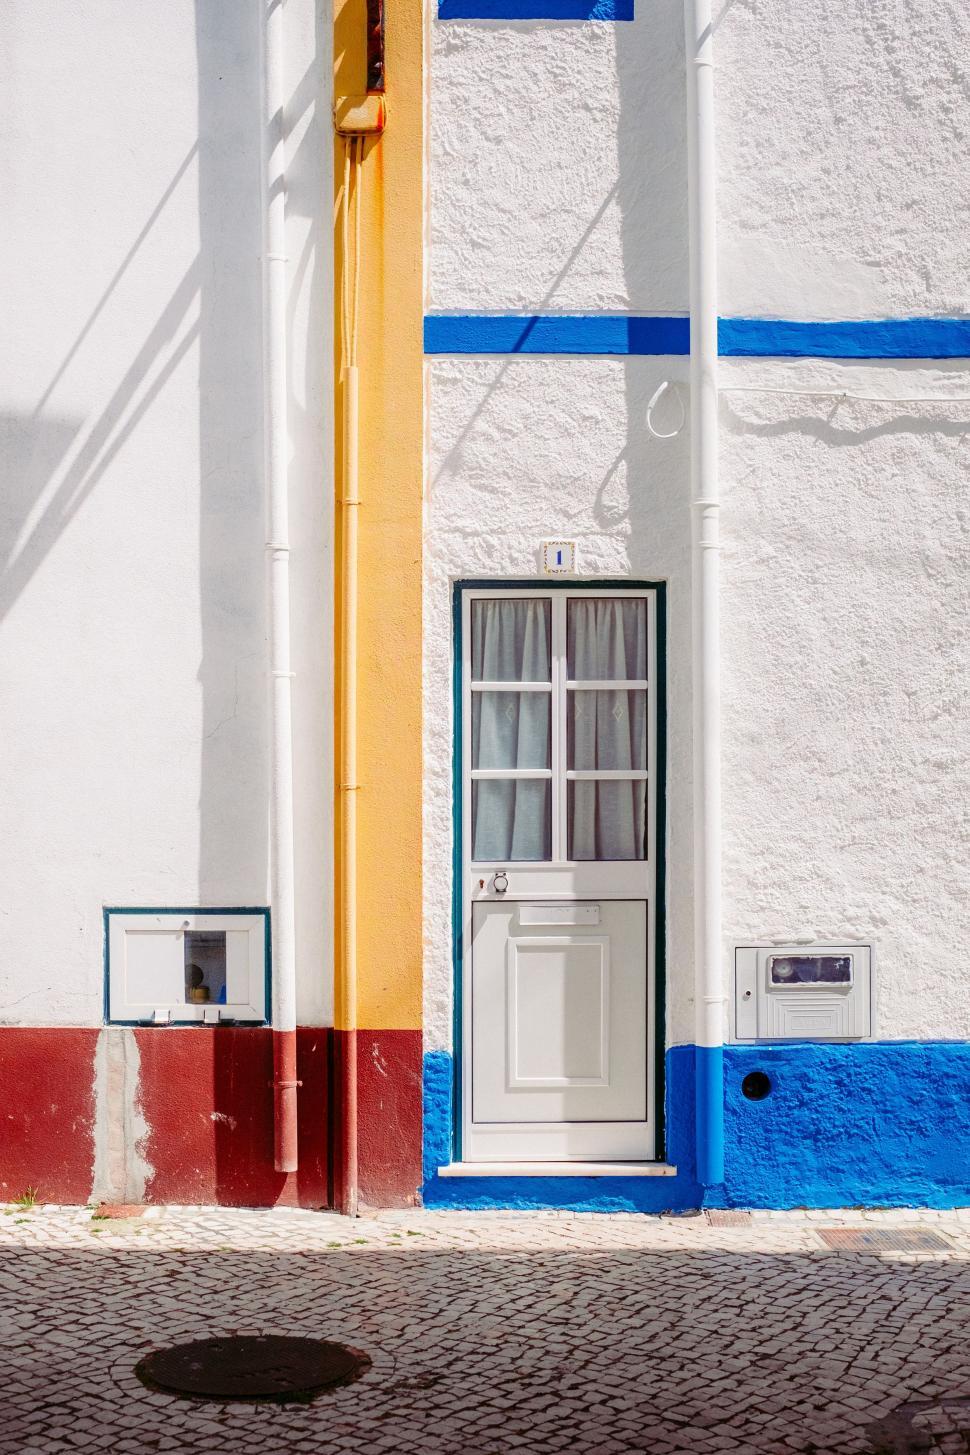 Free Image of White Entrance Door With Colorful Wall  